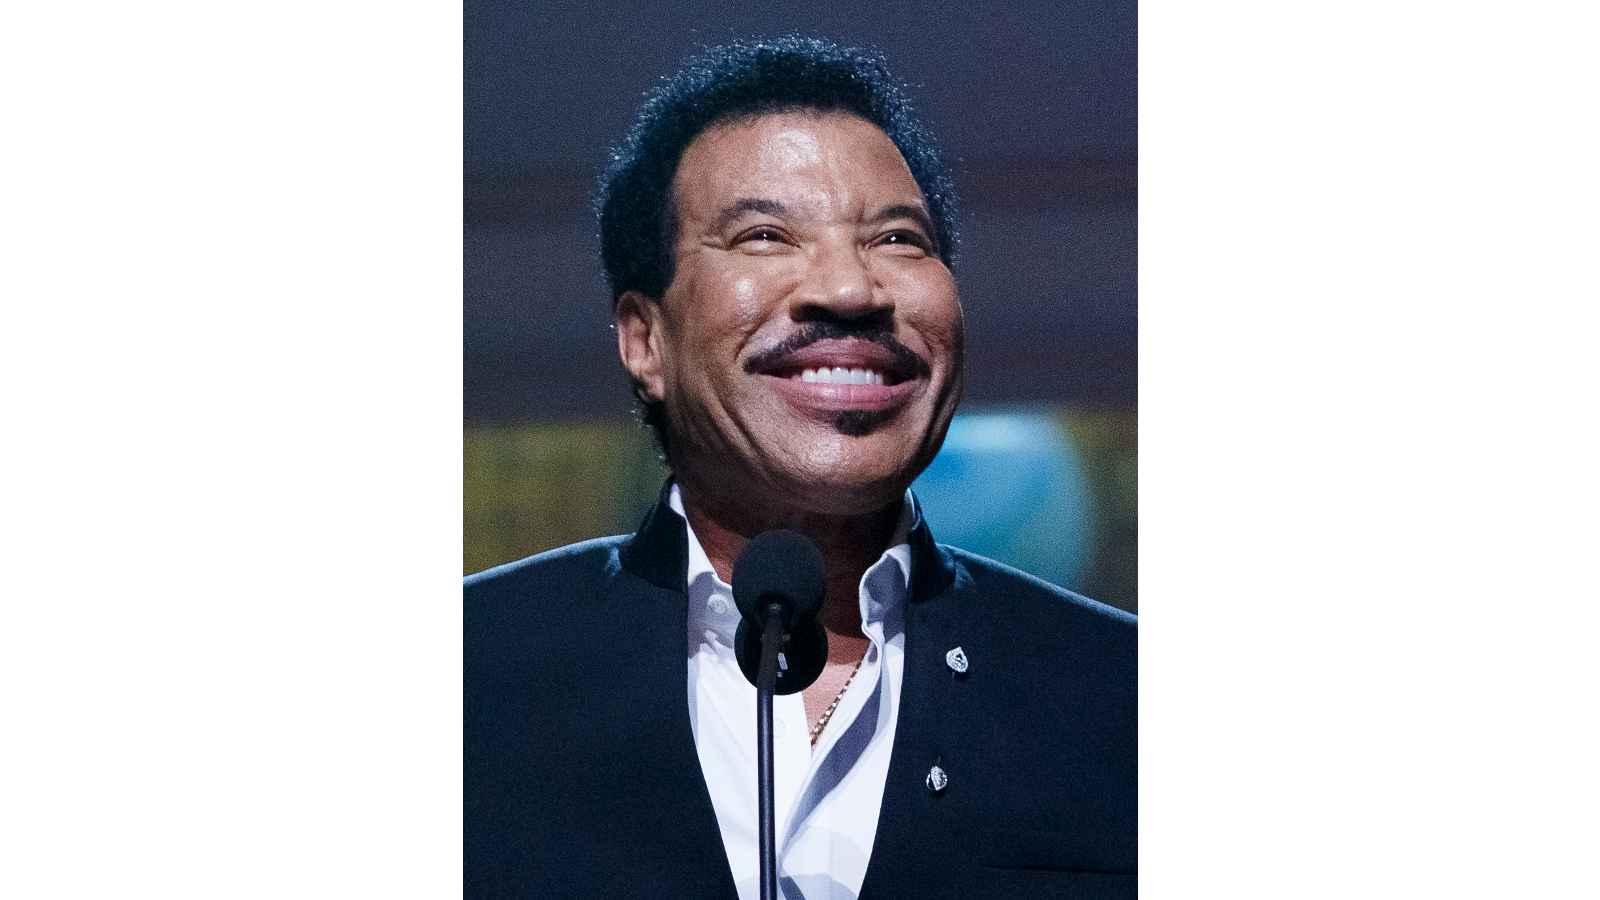 Lionel Richie Biography: Age, Height, Birthday, Family, Net Worth